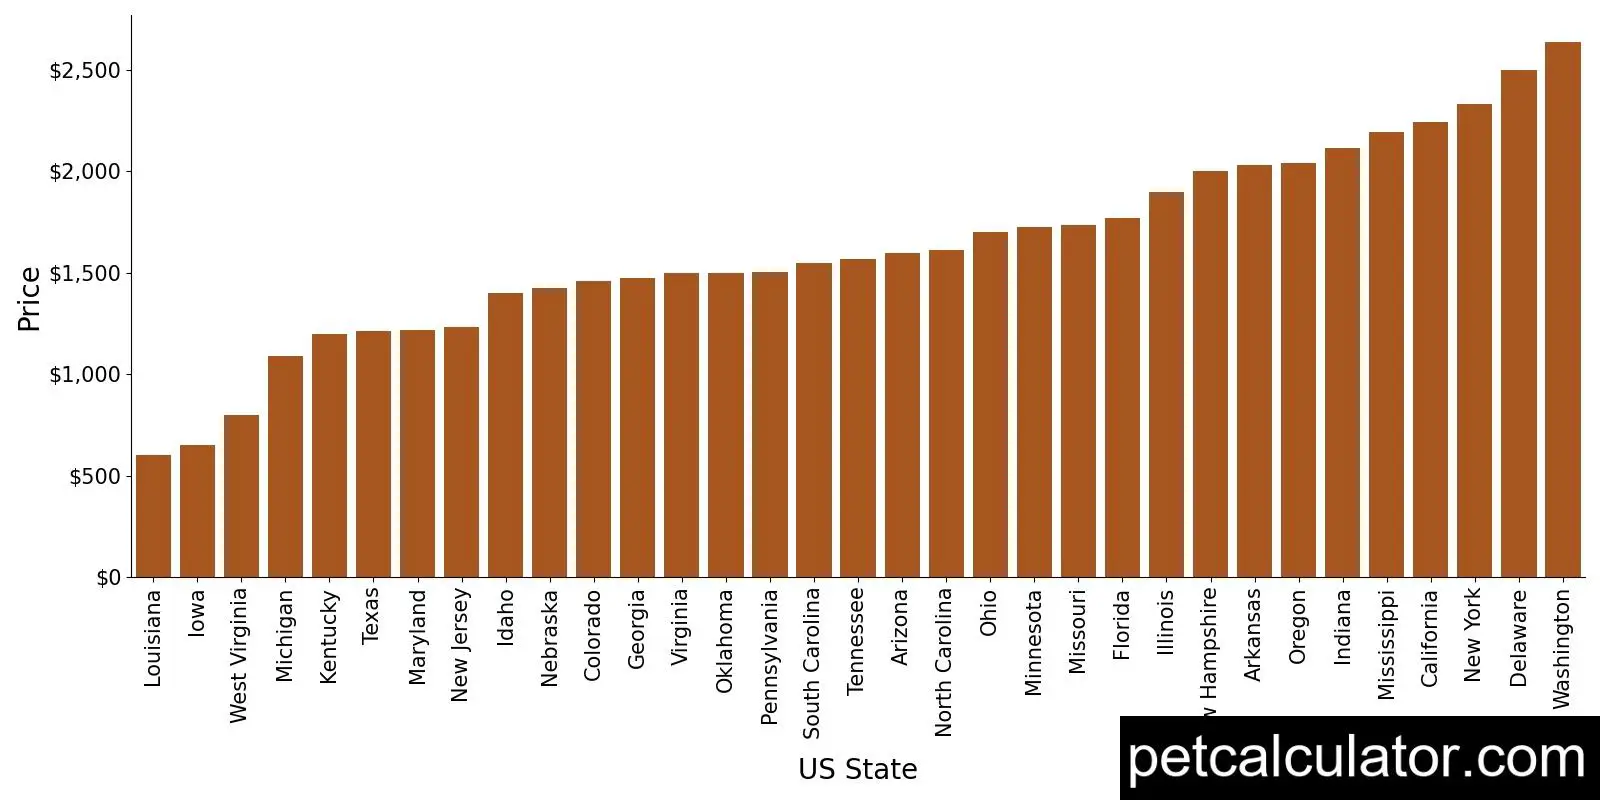 Price of Rottweiler by US State 